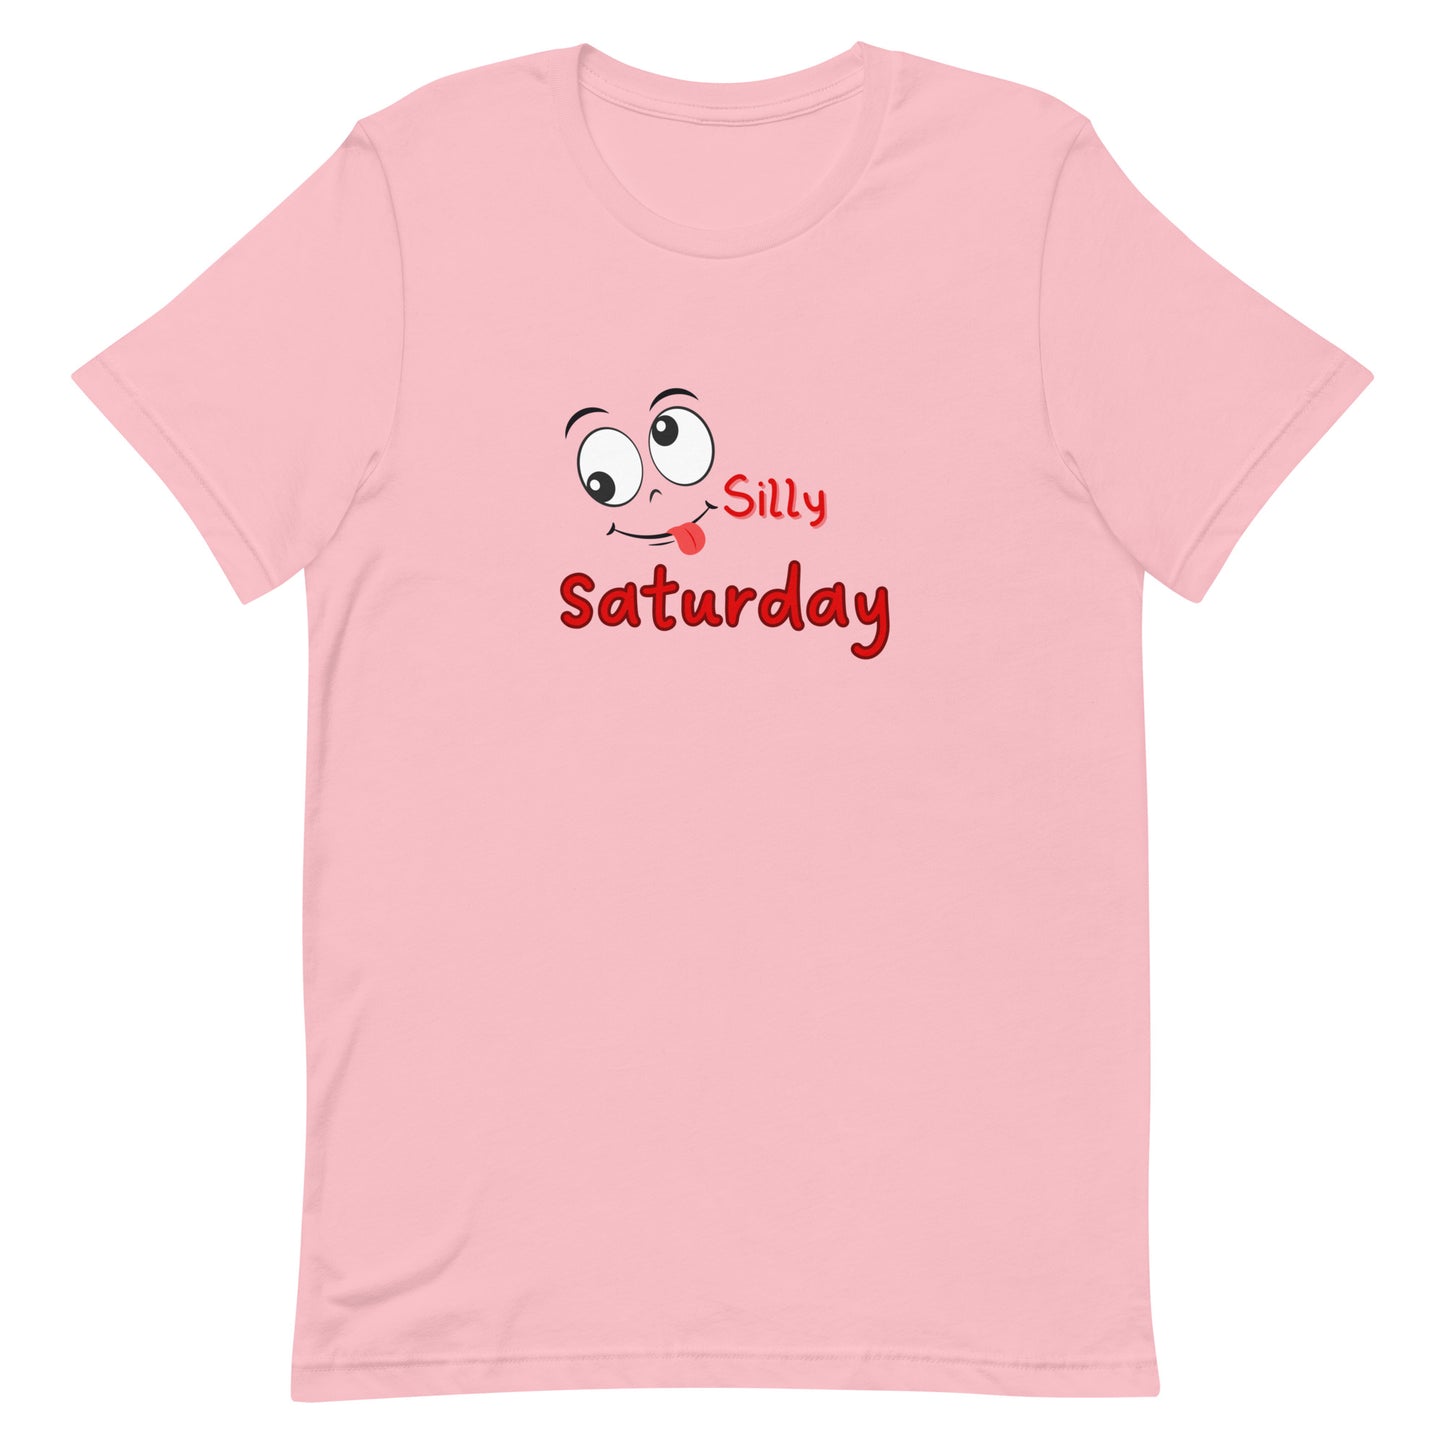 Silly Saturday T-Shirt - Add Laughter to Your Weekend Wardrobe!